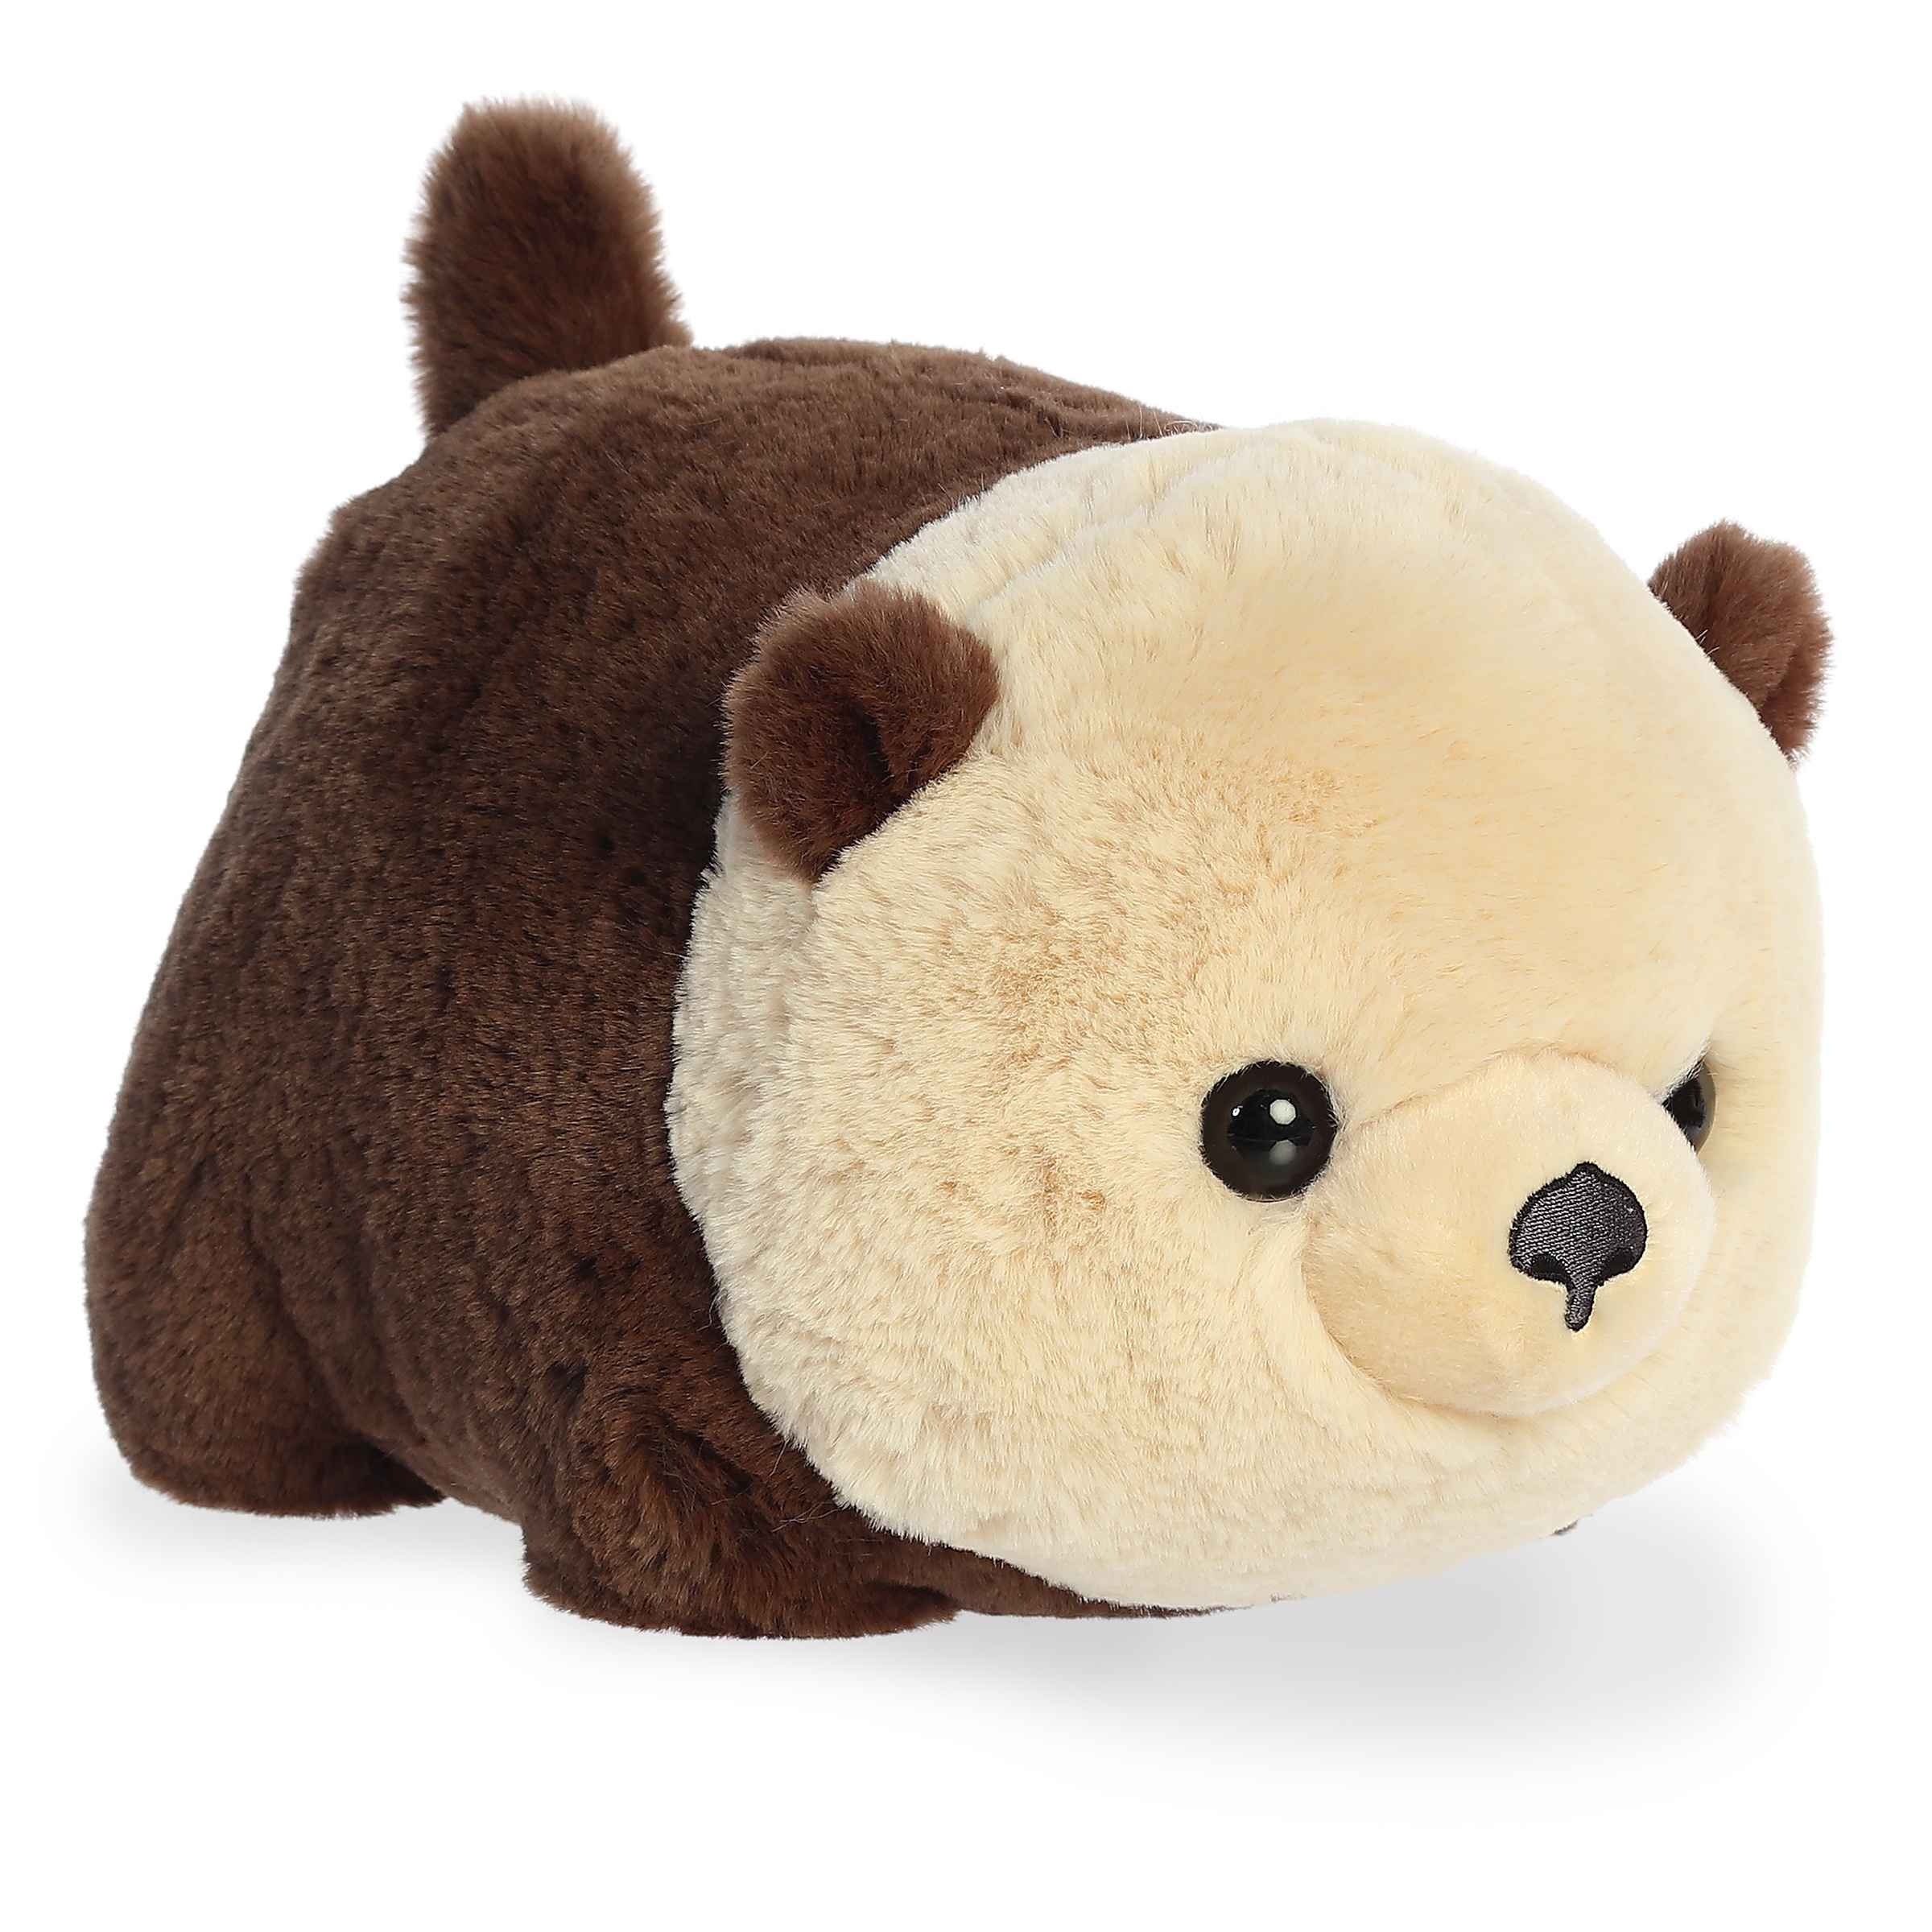 Saoirse Sea Otter plush from Spudsters, soft light and dark brown fur, endearing features, cuddly